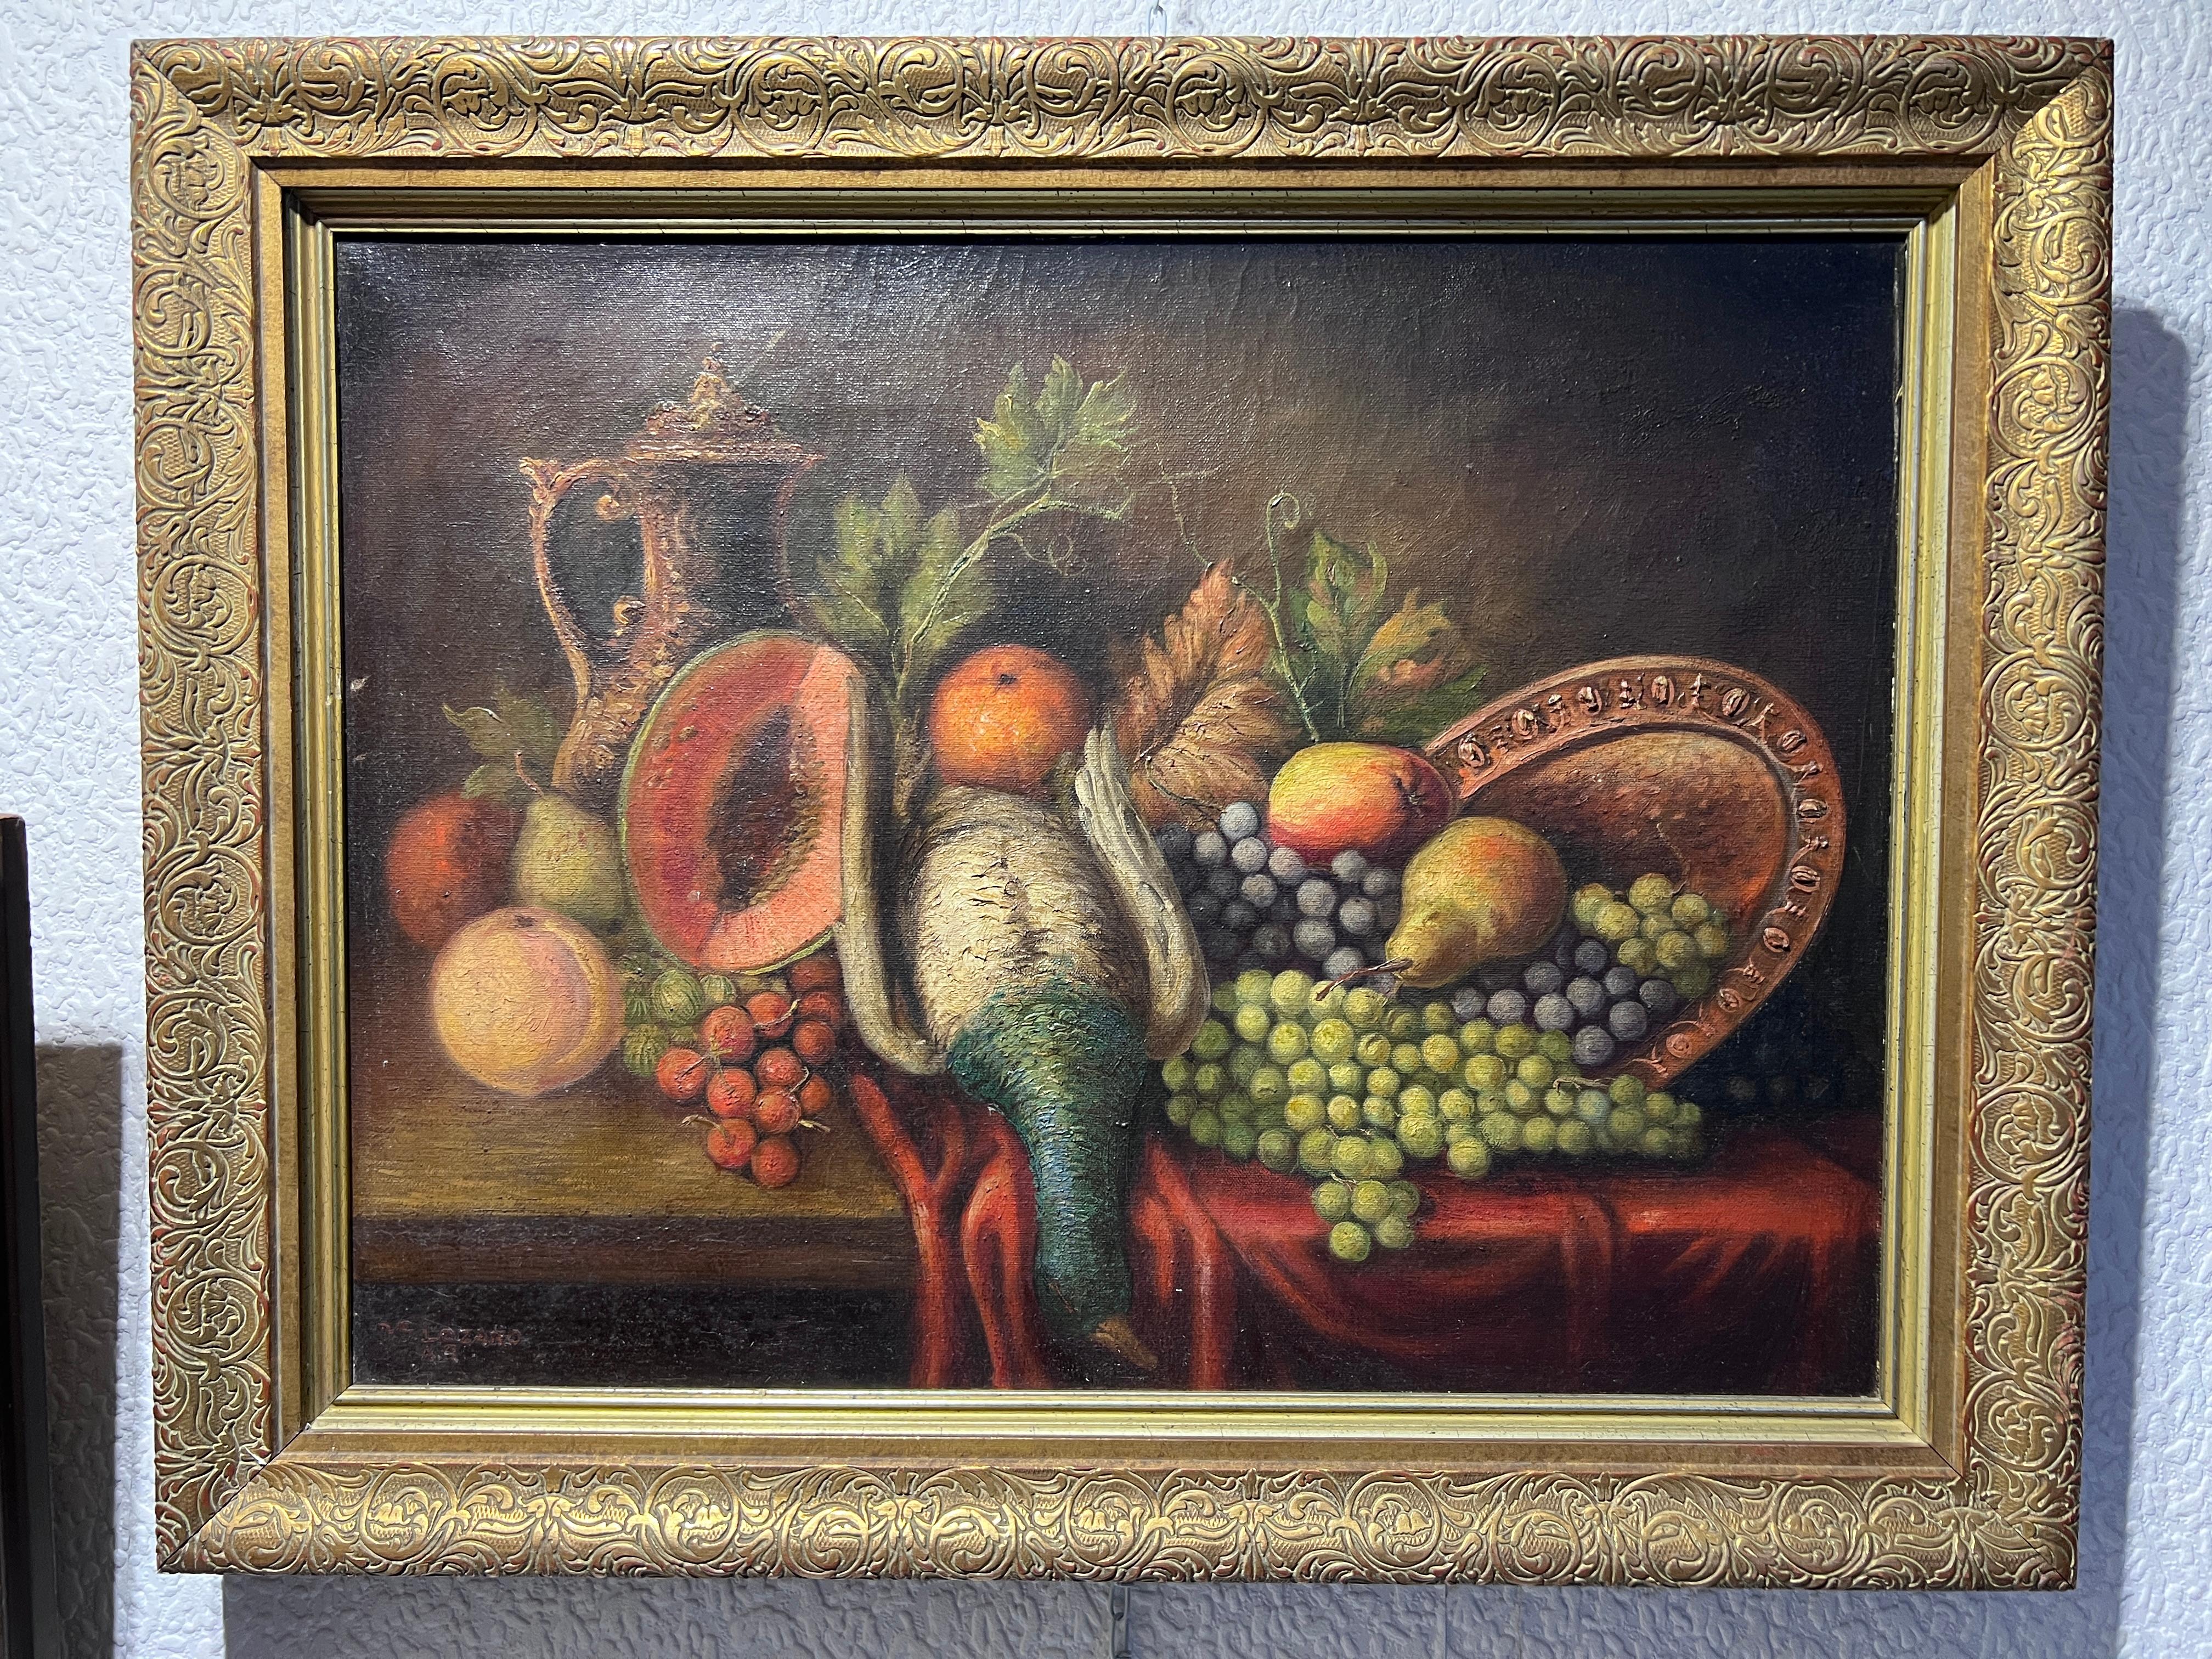 Up for sale is a beautiful original vintage oil painting on canvas depicting a sumptuously detailed still life oil painting, featuring a diverse arrangement of fruits and a deceased duck, carefully composed to evoke the transience of life and the